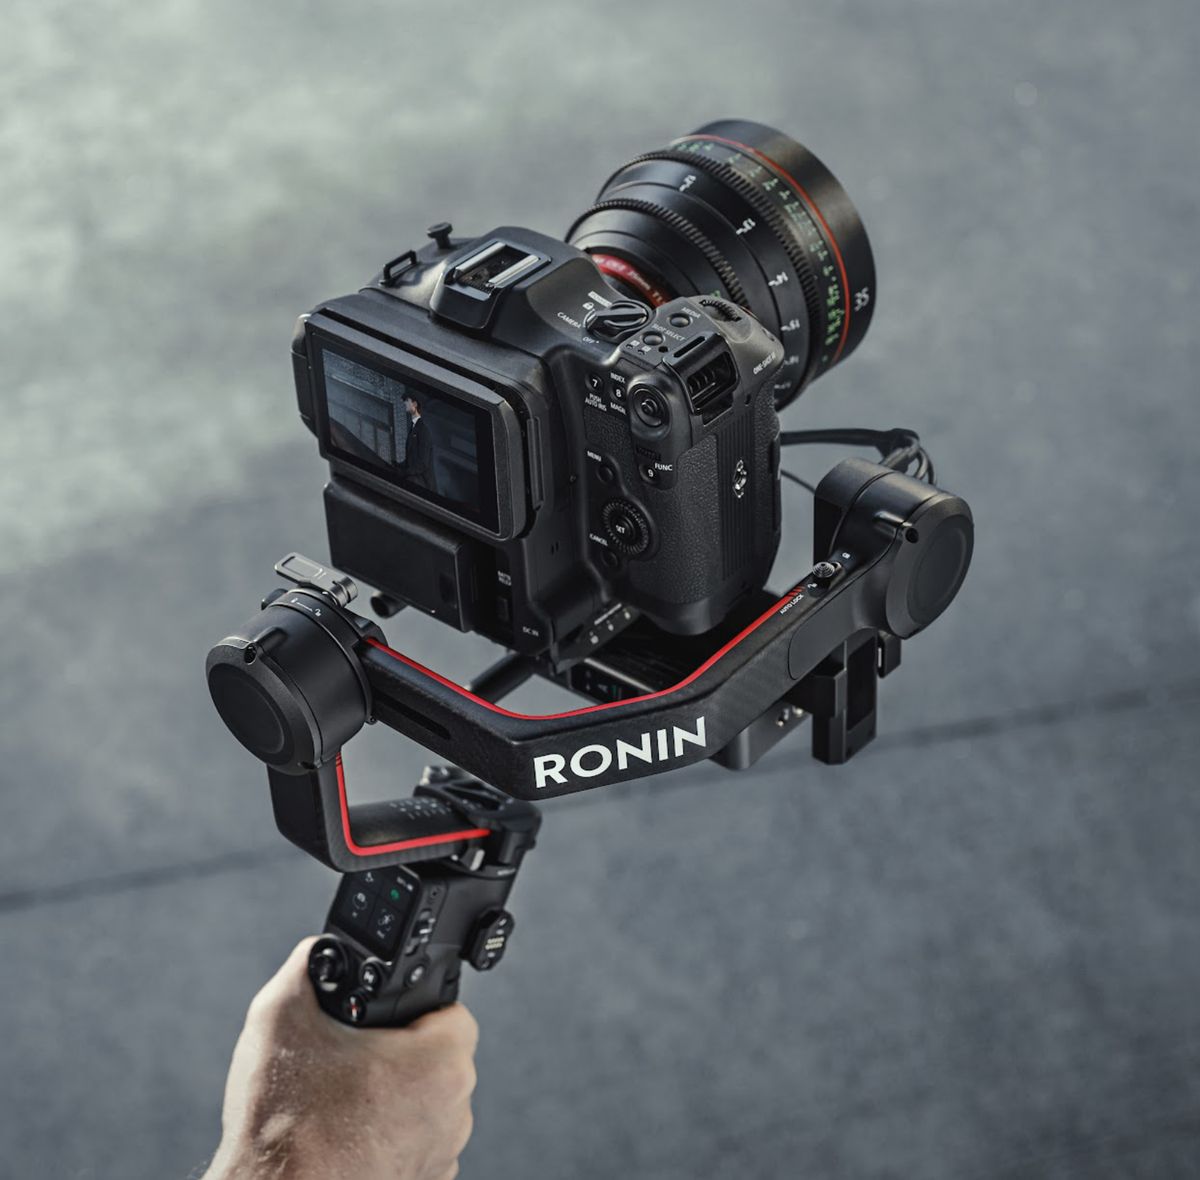 Getting Started With DJI Ronin Gimbals